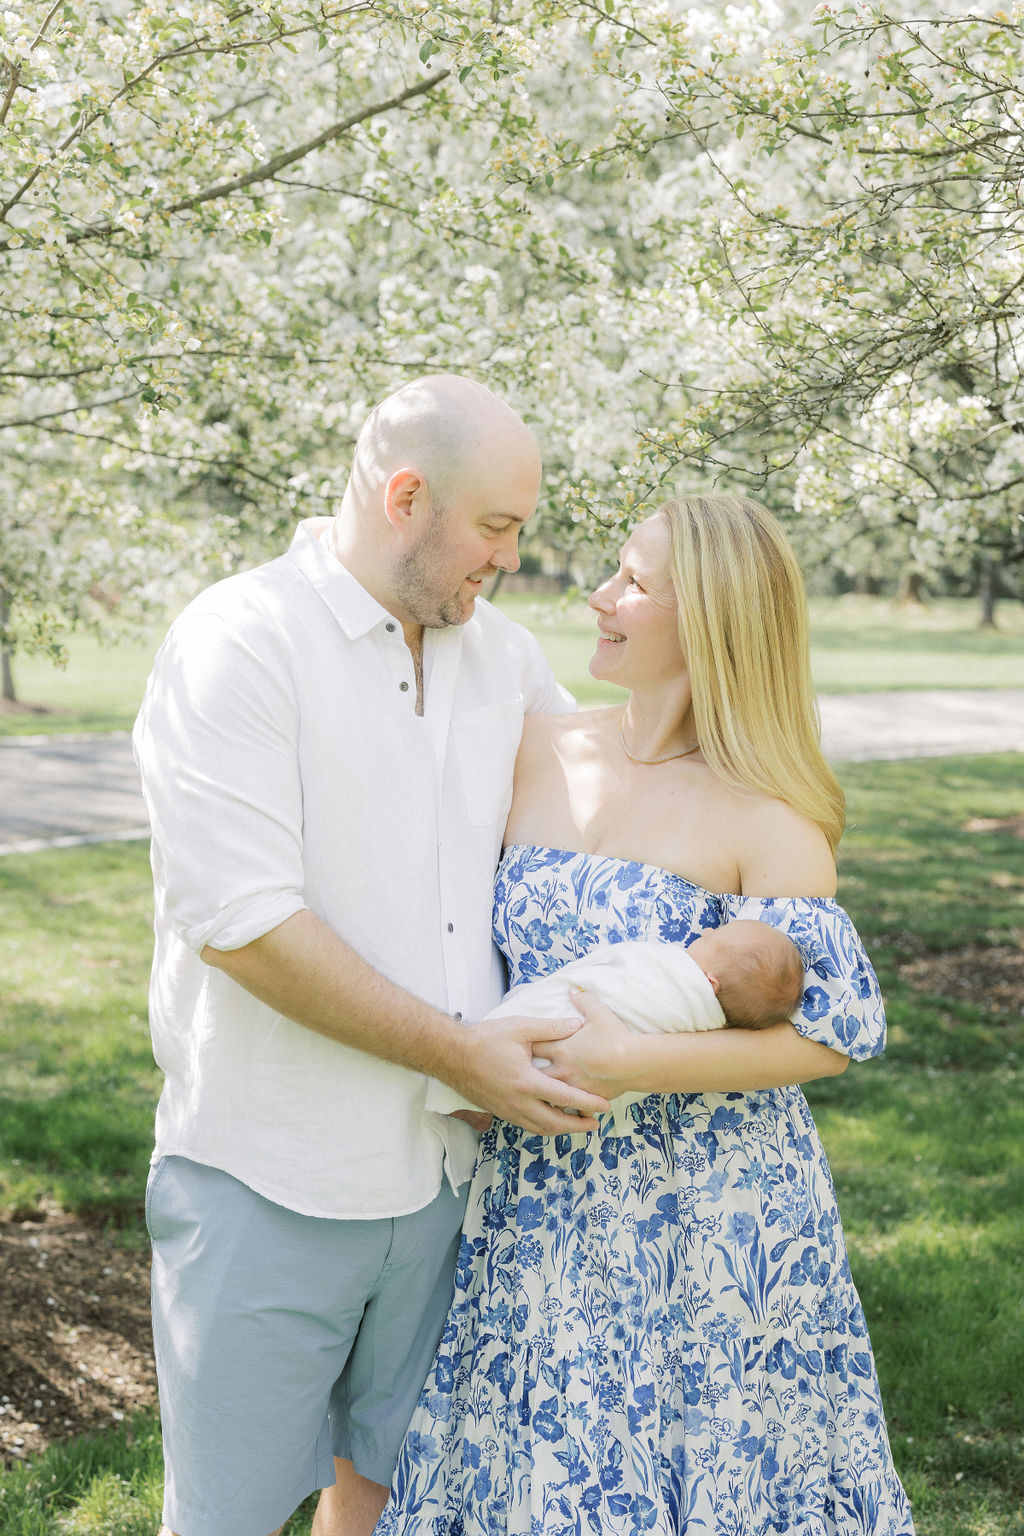 Happy parents stand in a floral park holding their newborn baby in their arms thanks to fertility acupuncture nj